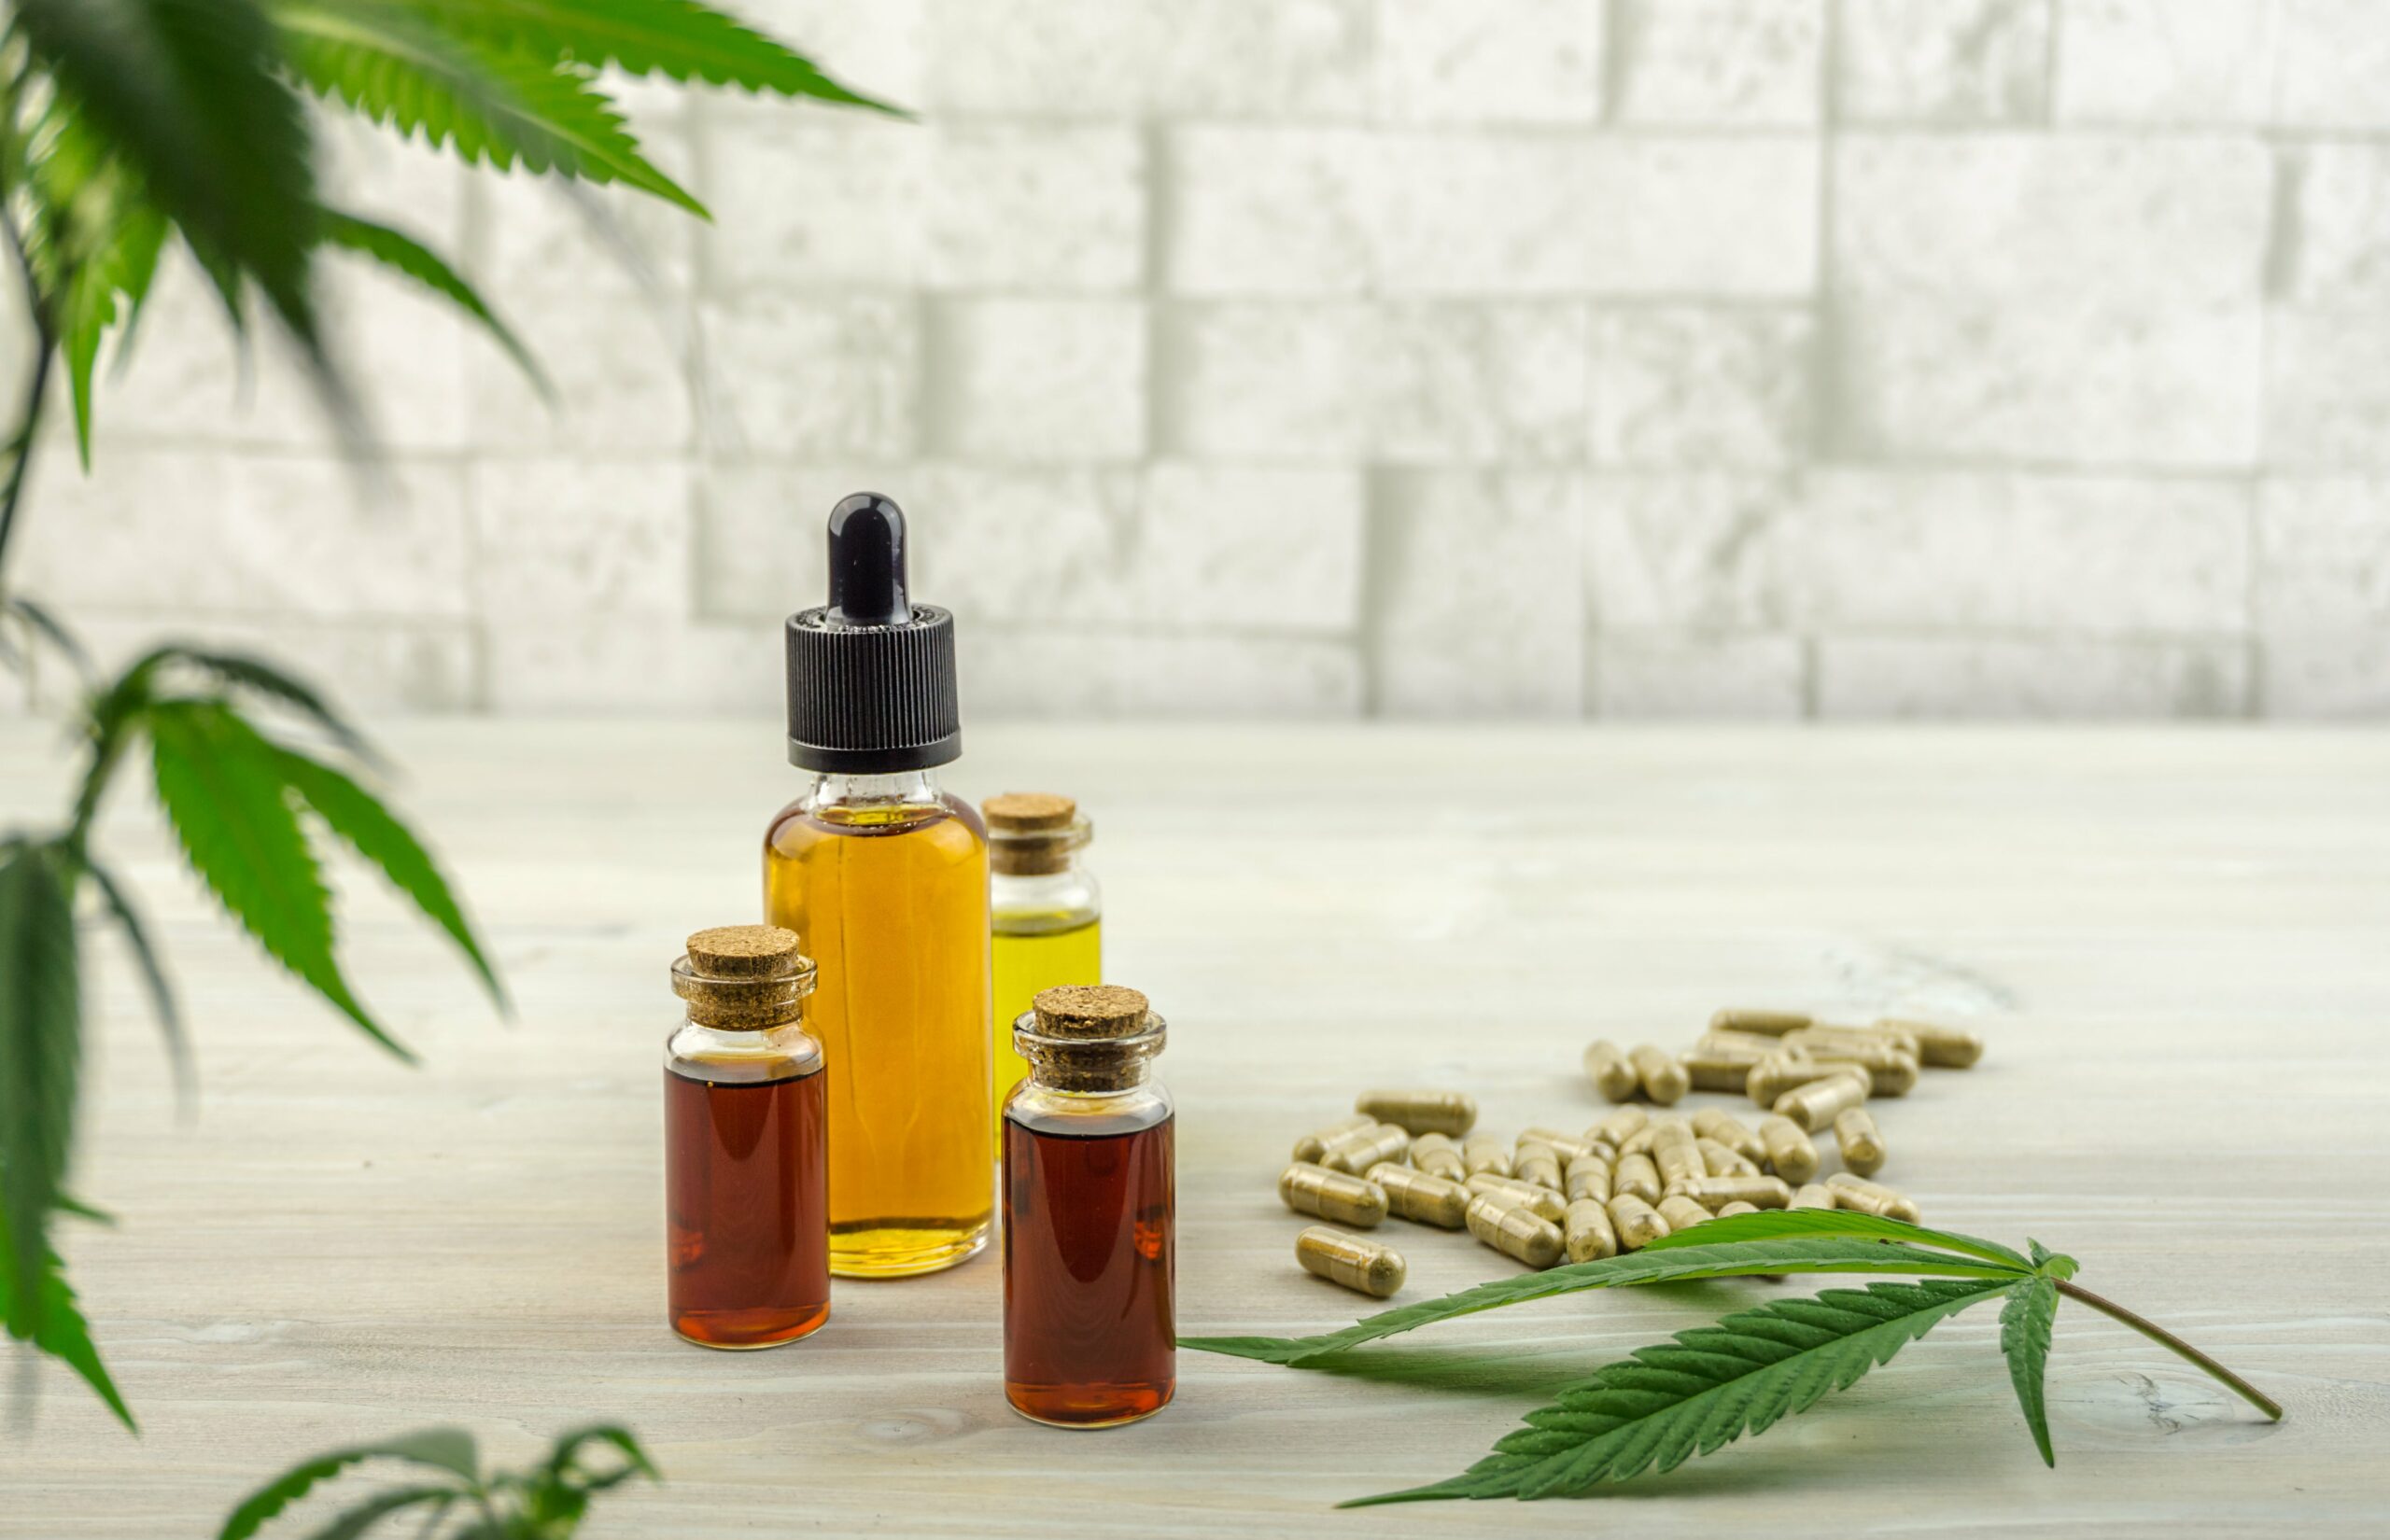 Is CBD Oil Good For Pain After Surgery?